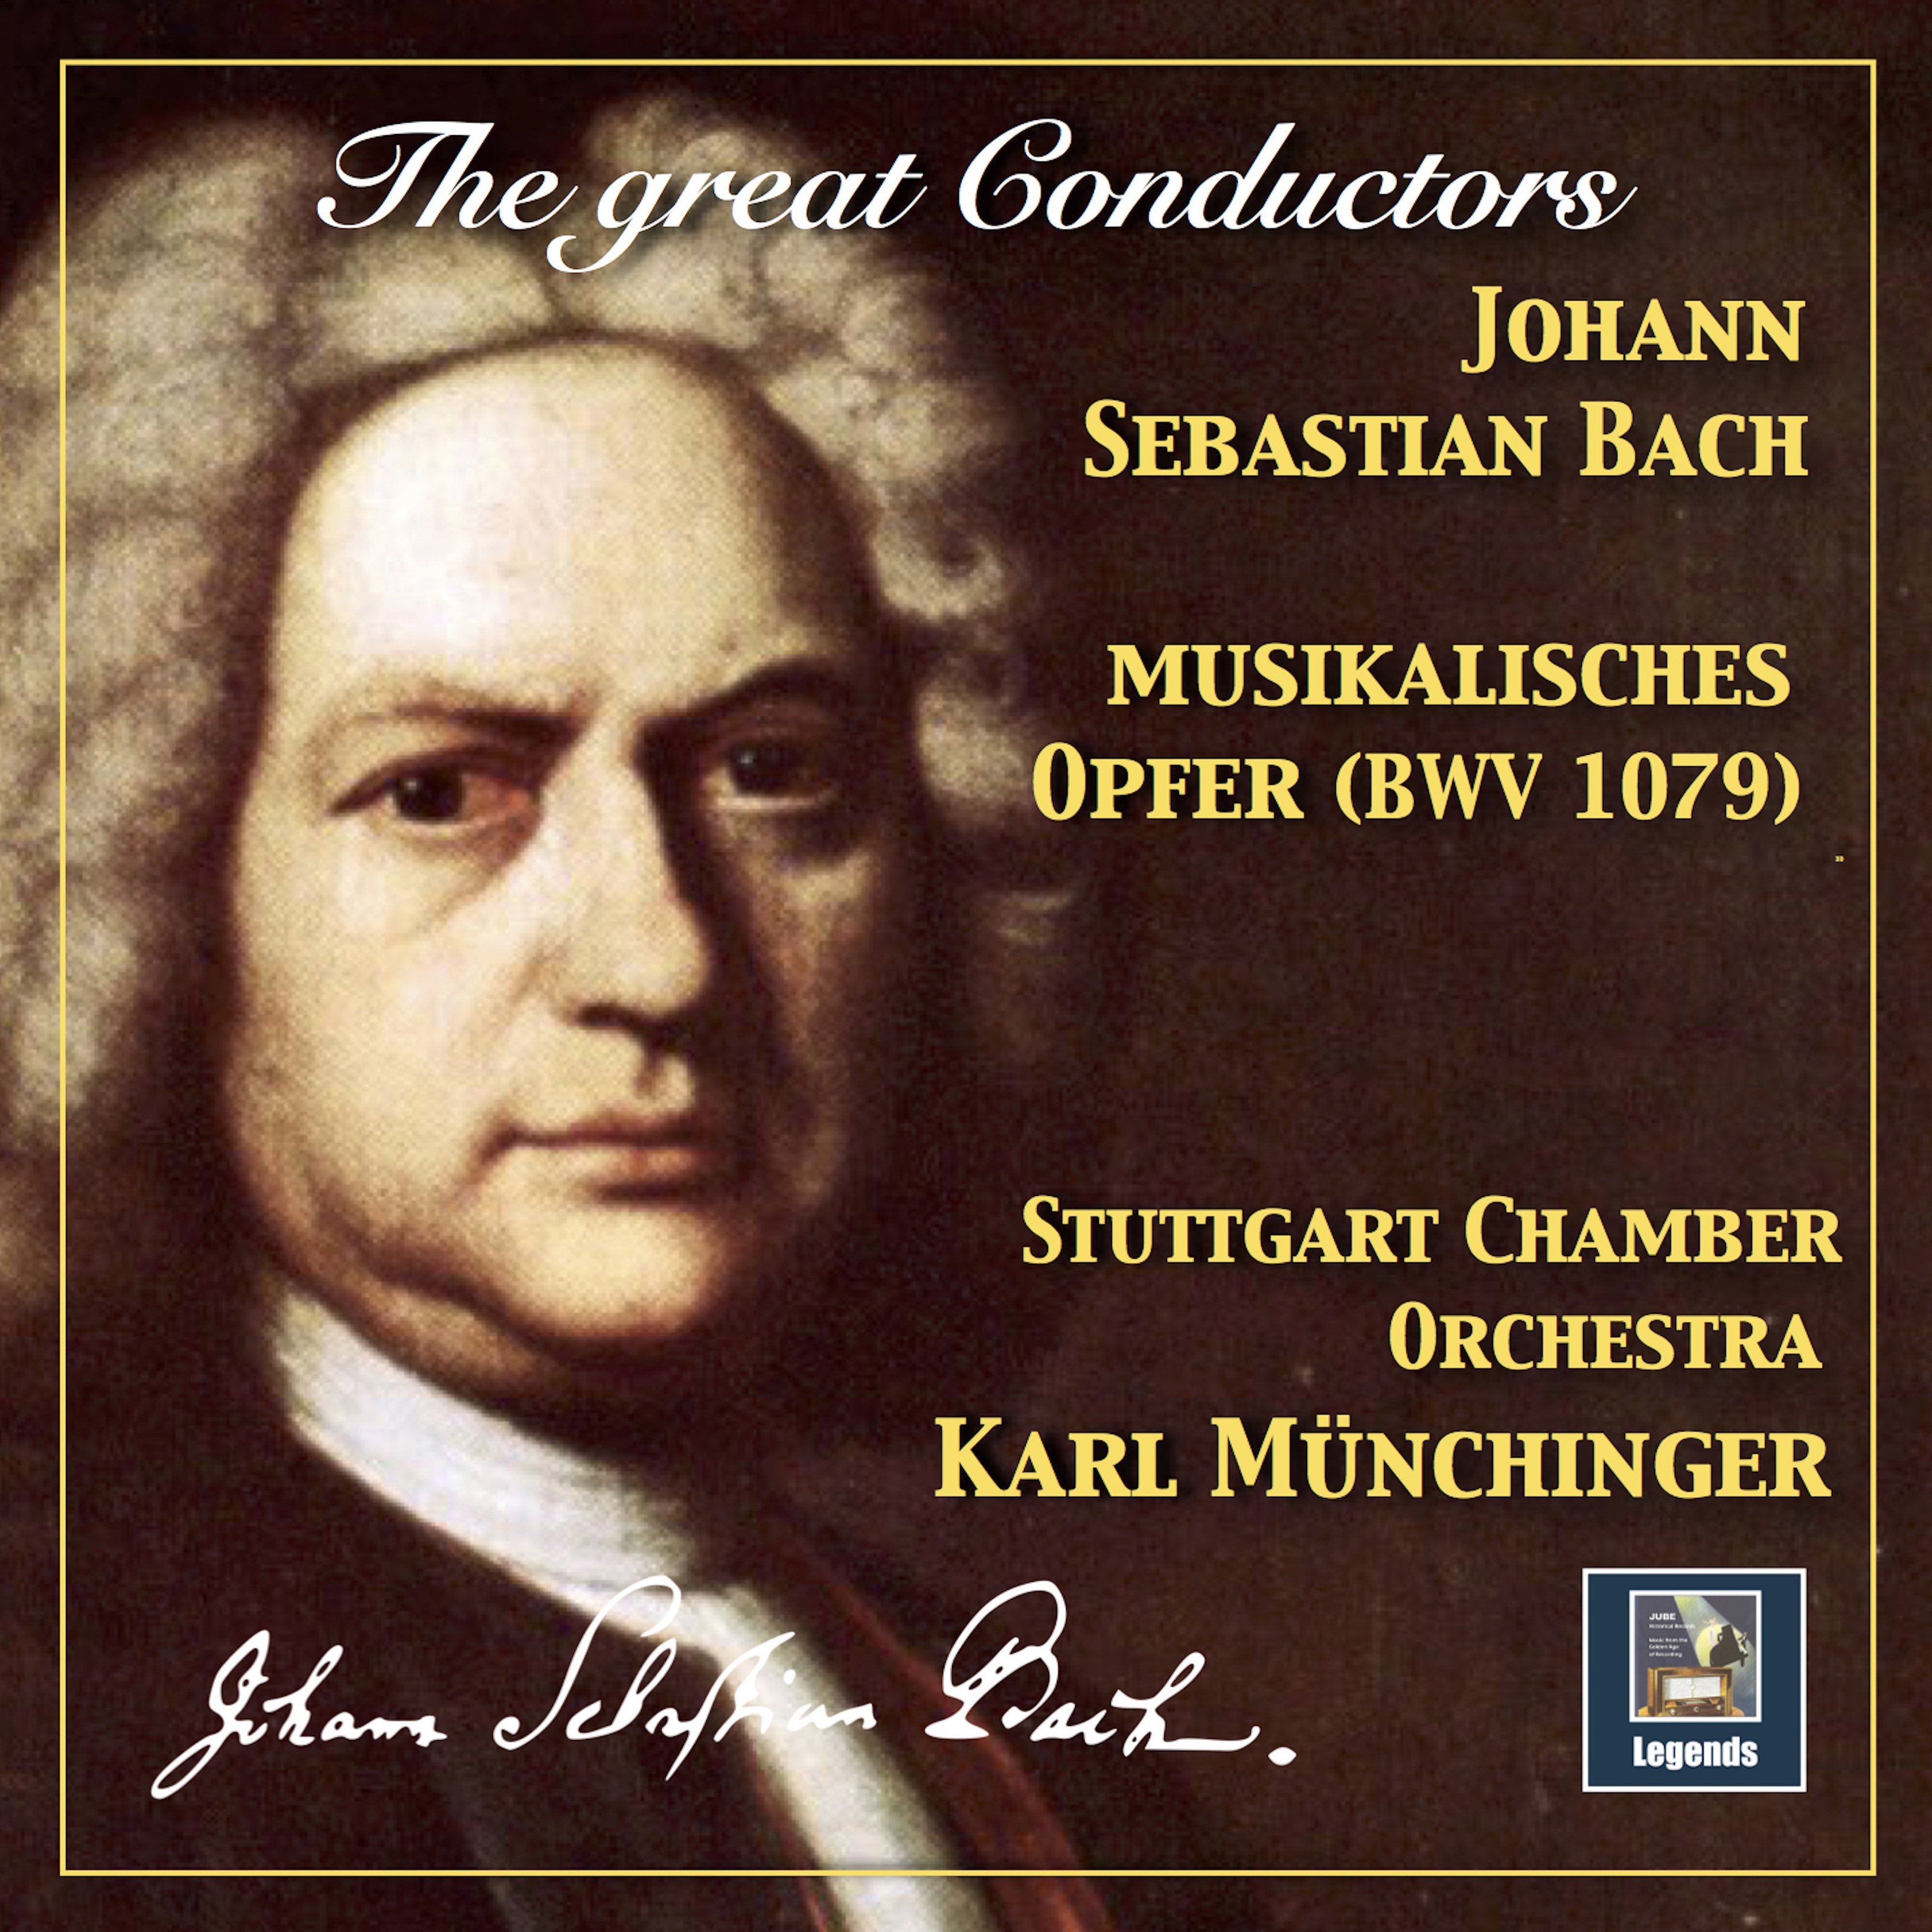 Musikalisches Opfer, BWV 1079 Arr. K. Mü nchinger for Chamber Orchestra: Ricercare a 3